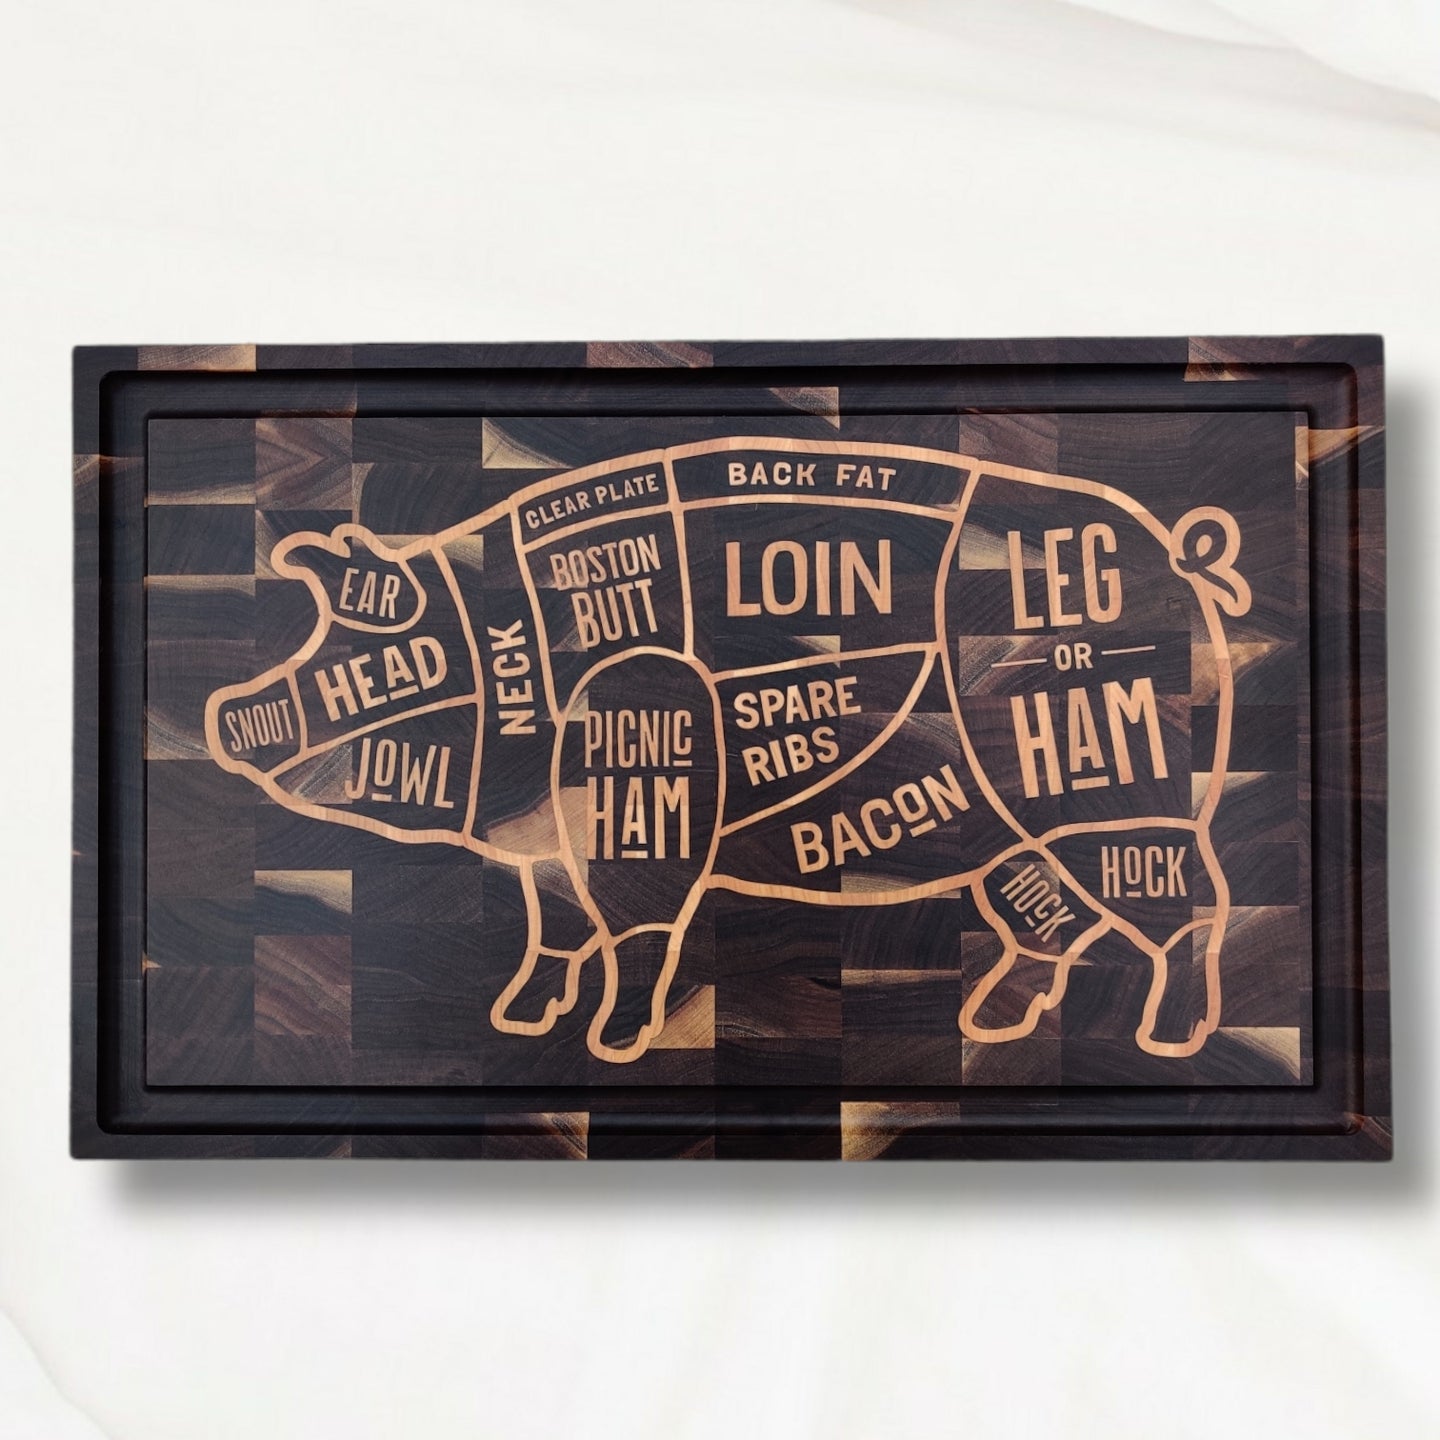 Grilling Themed Small Cutting Boards – The Cracked Pig